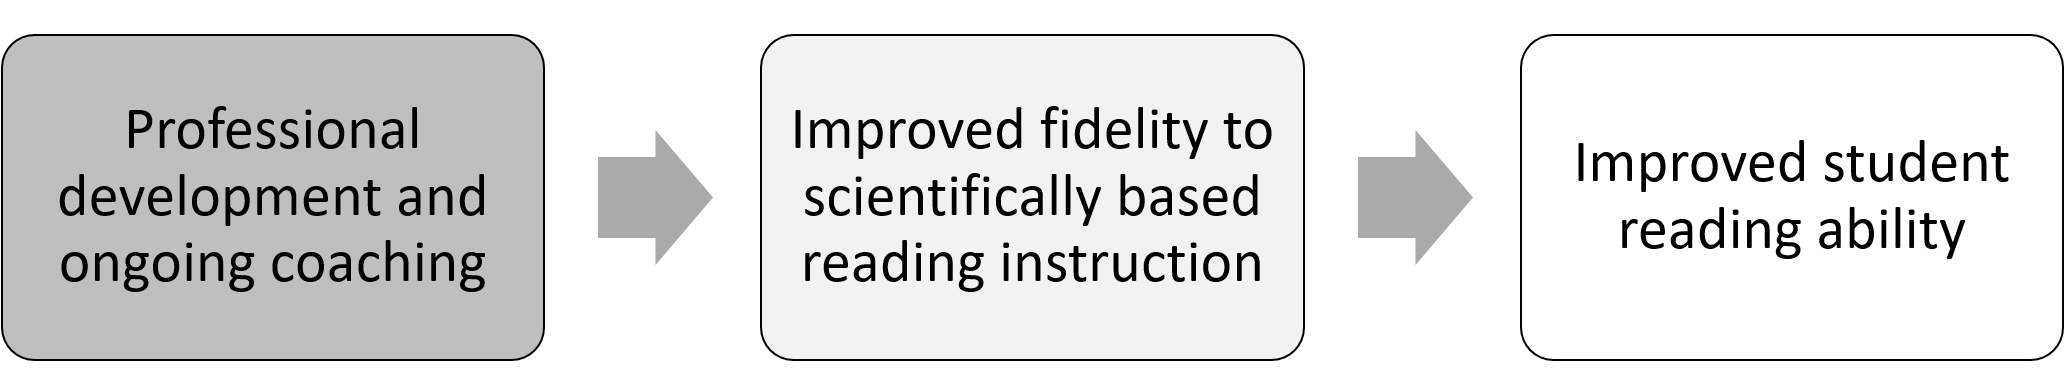 Professional Development -> Improved fidelity to scientifically based reading instruction -> improved student reading ability